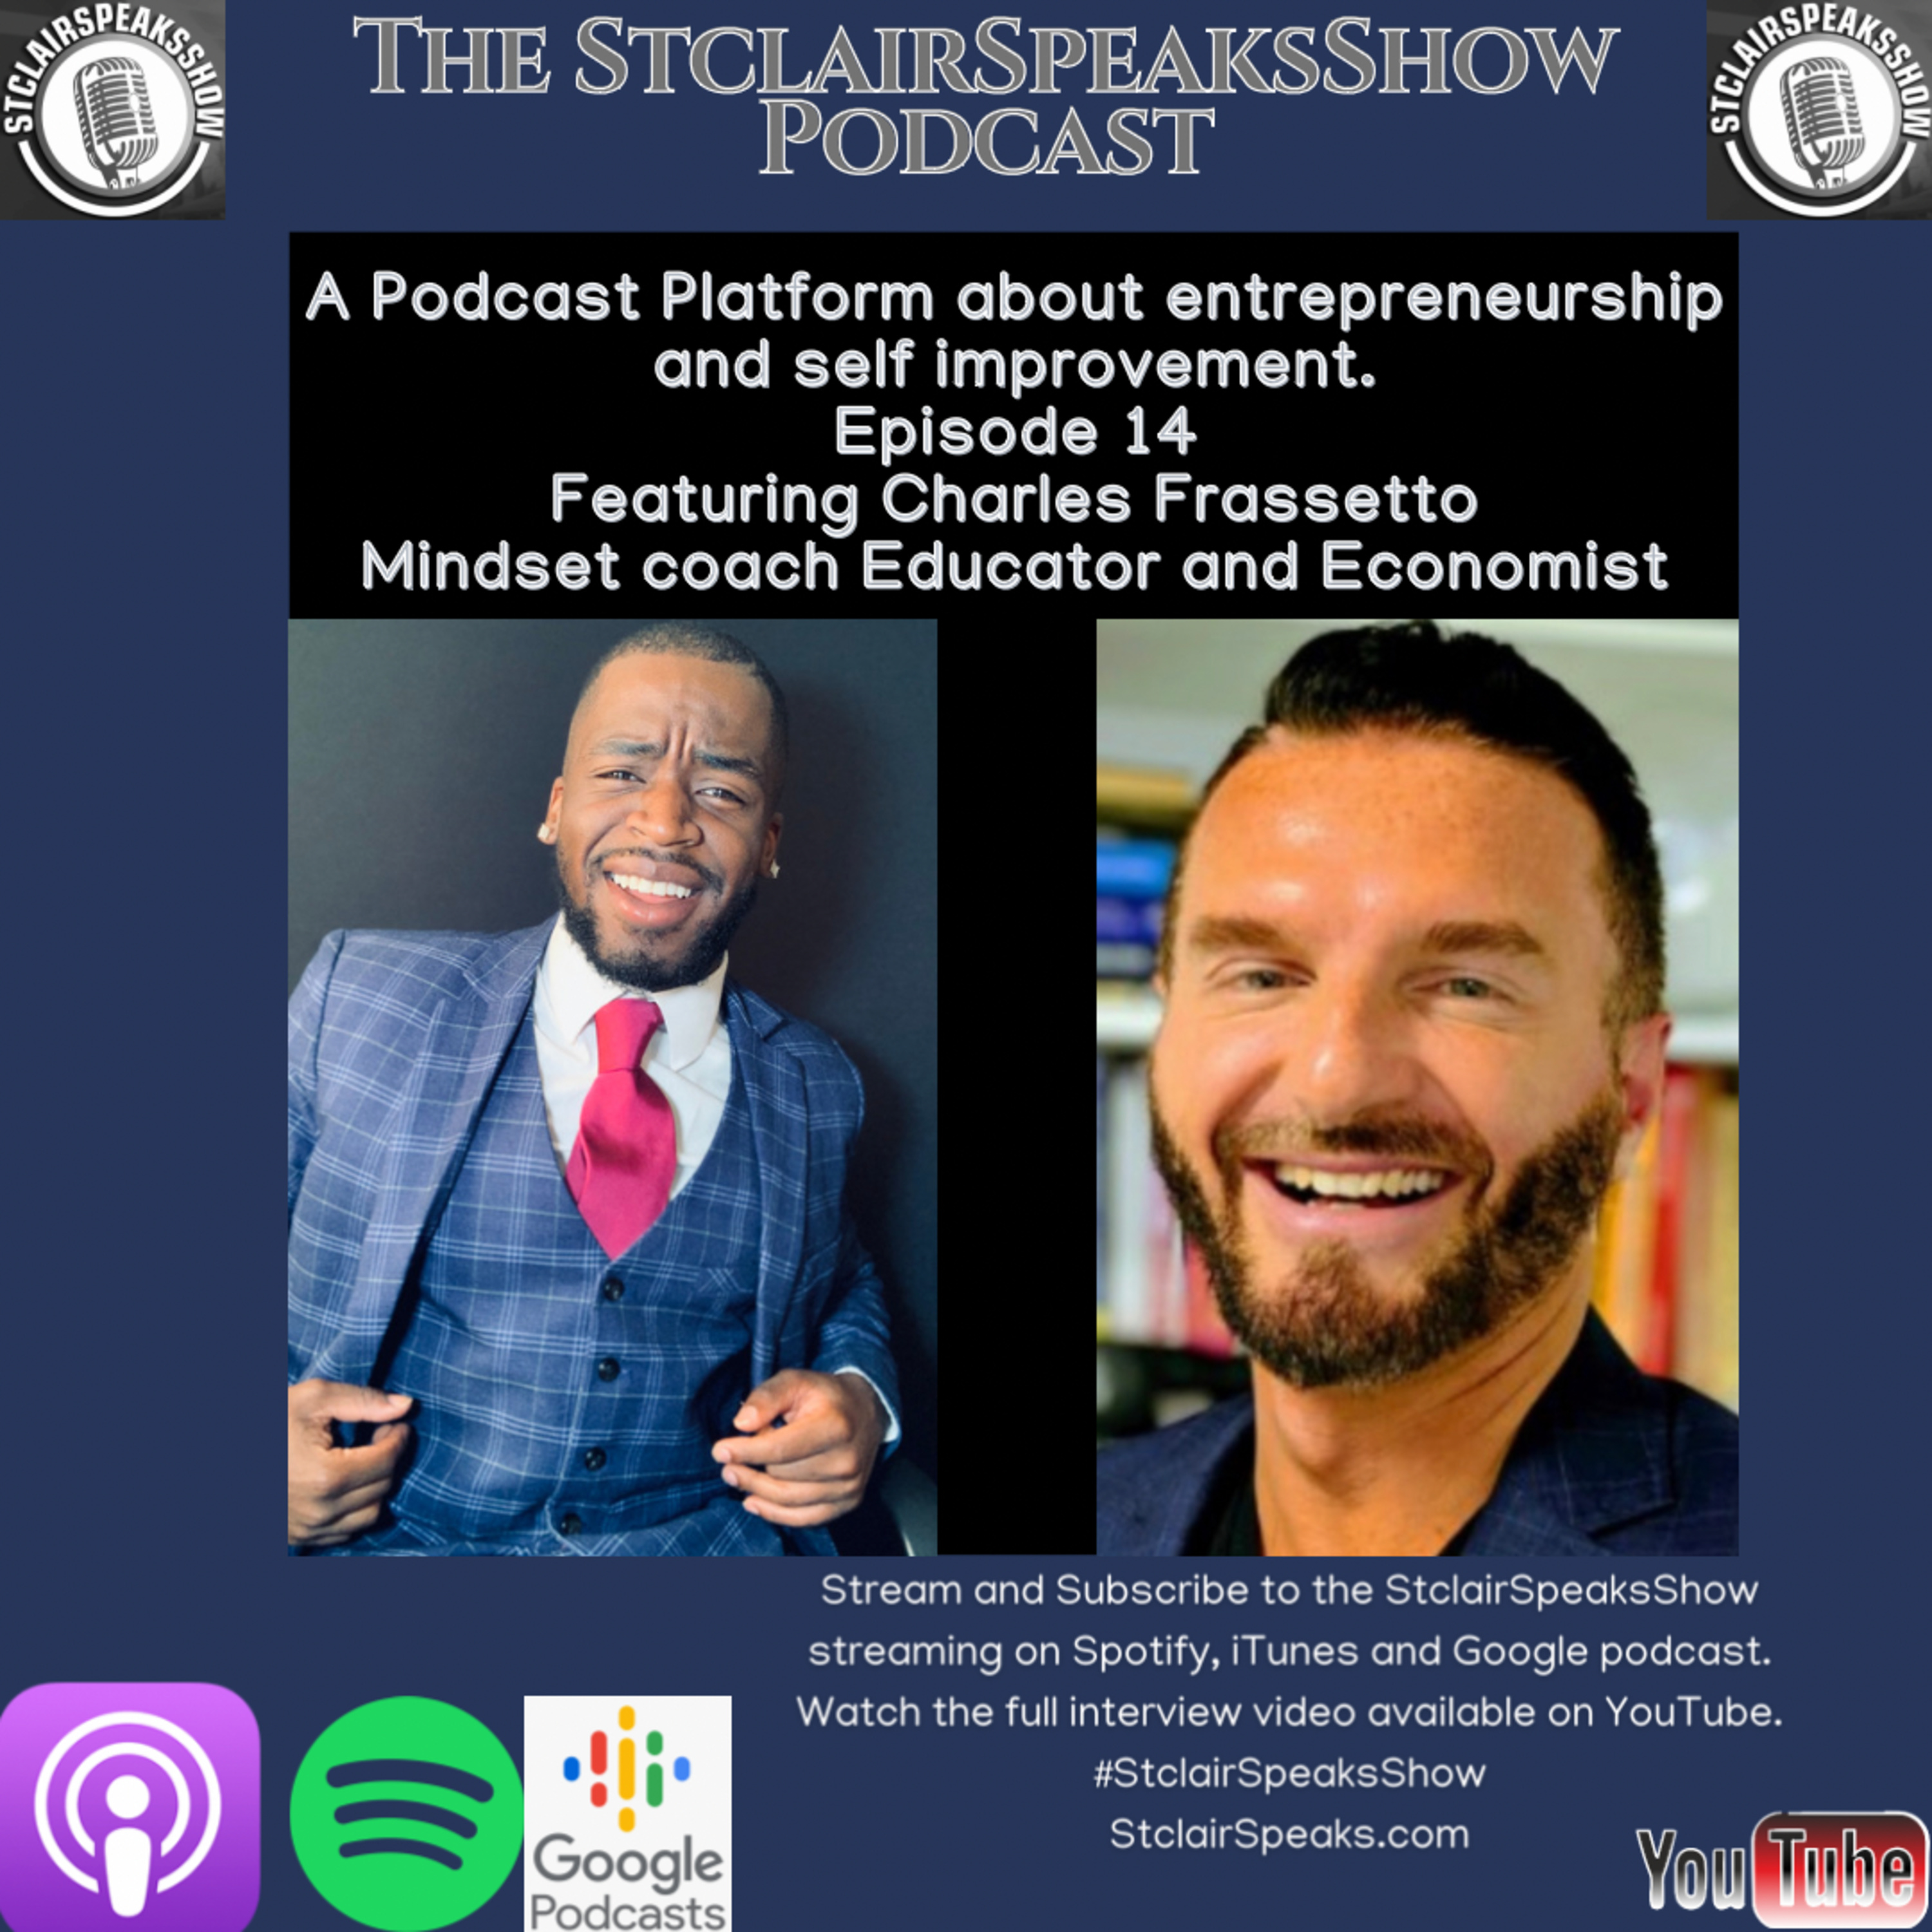 The StclairSpeaksShow Podcast Featuring Charles Frassetto Educator, Economist & Mindset Coach Image